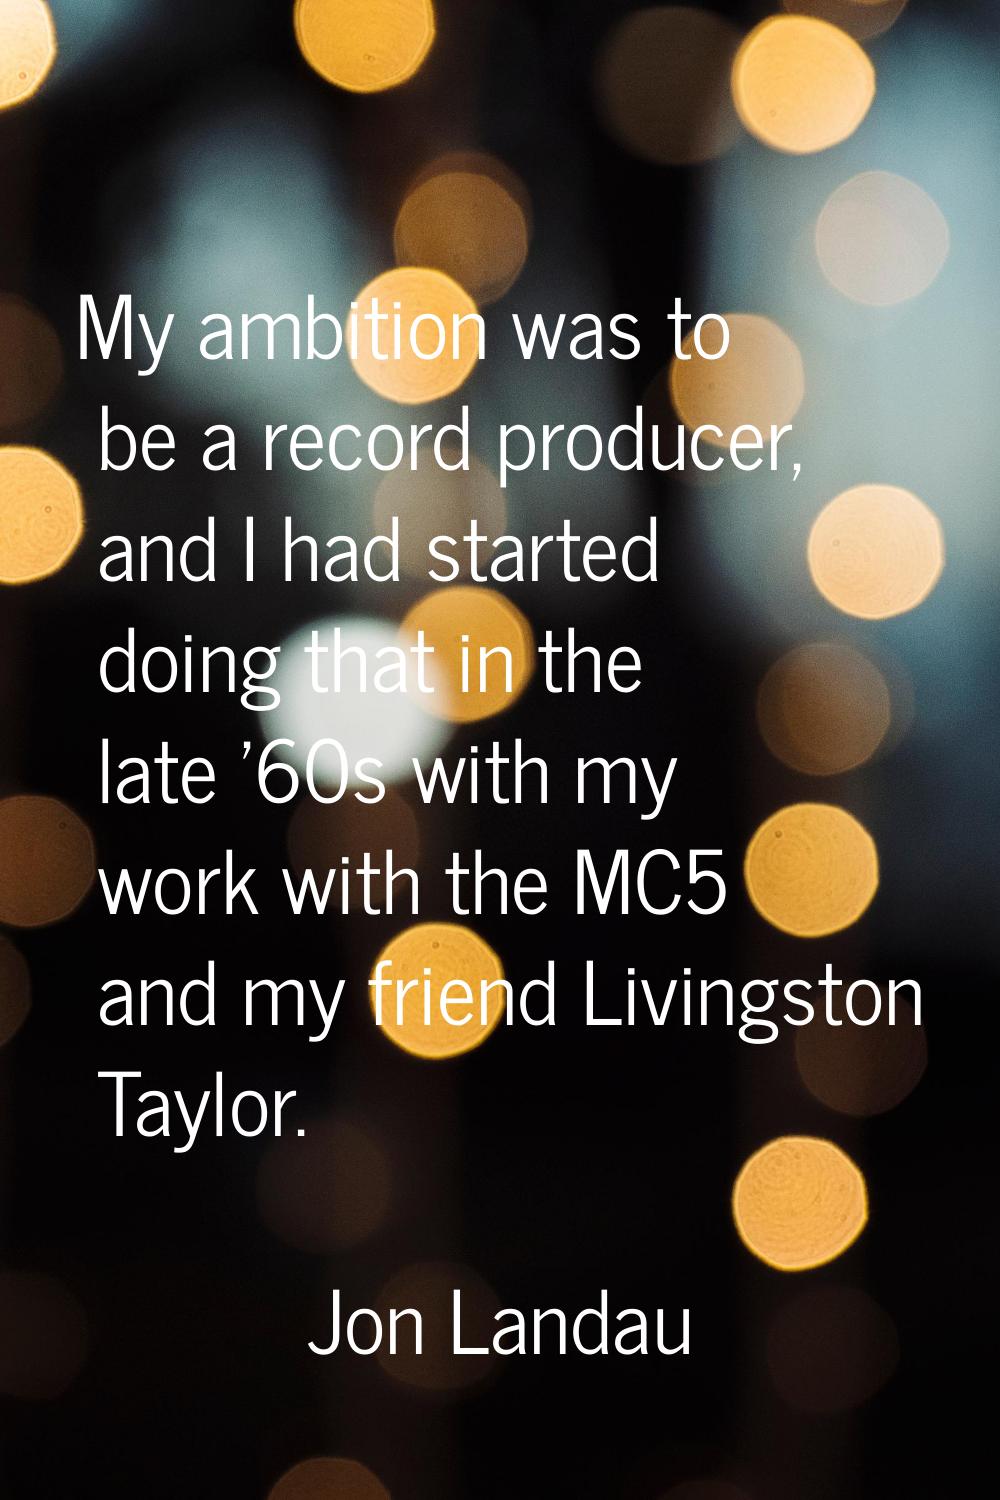 My ambition was to be a record producer, and I had started doing that in the late '60s with my work